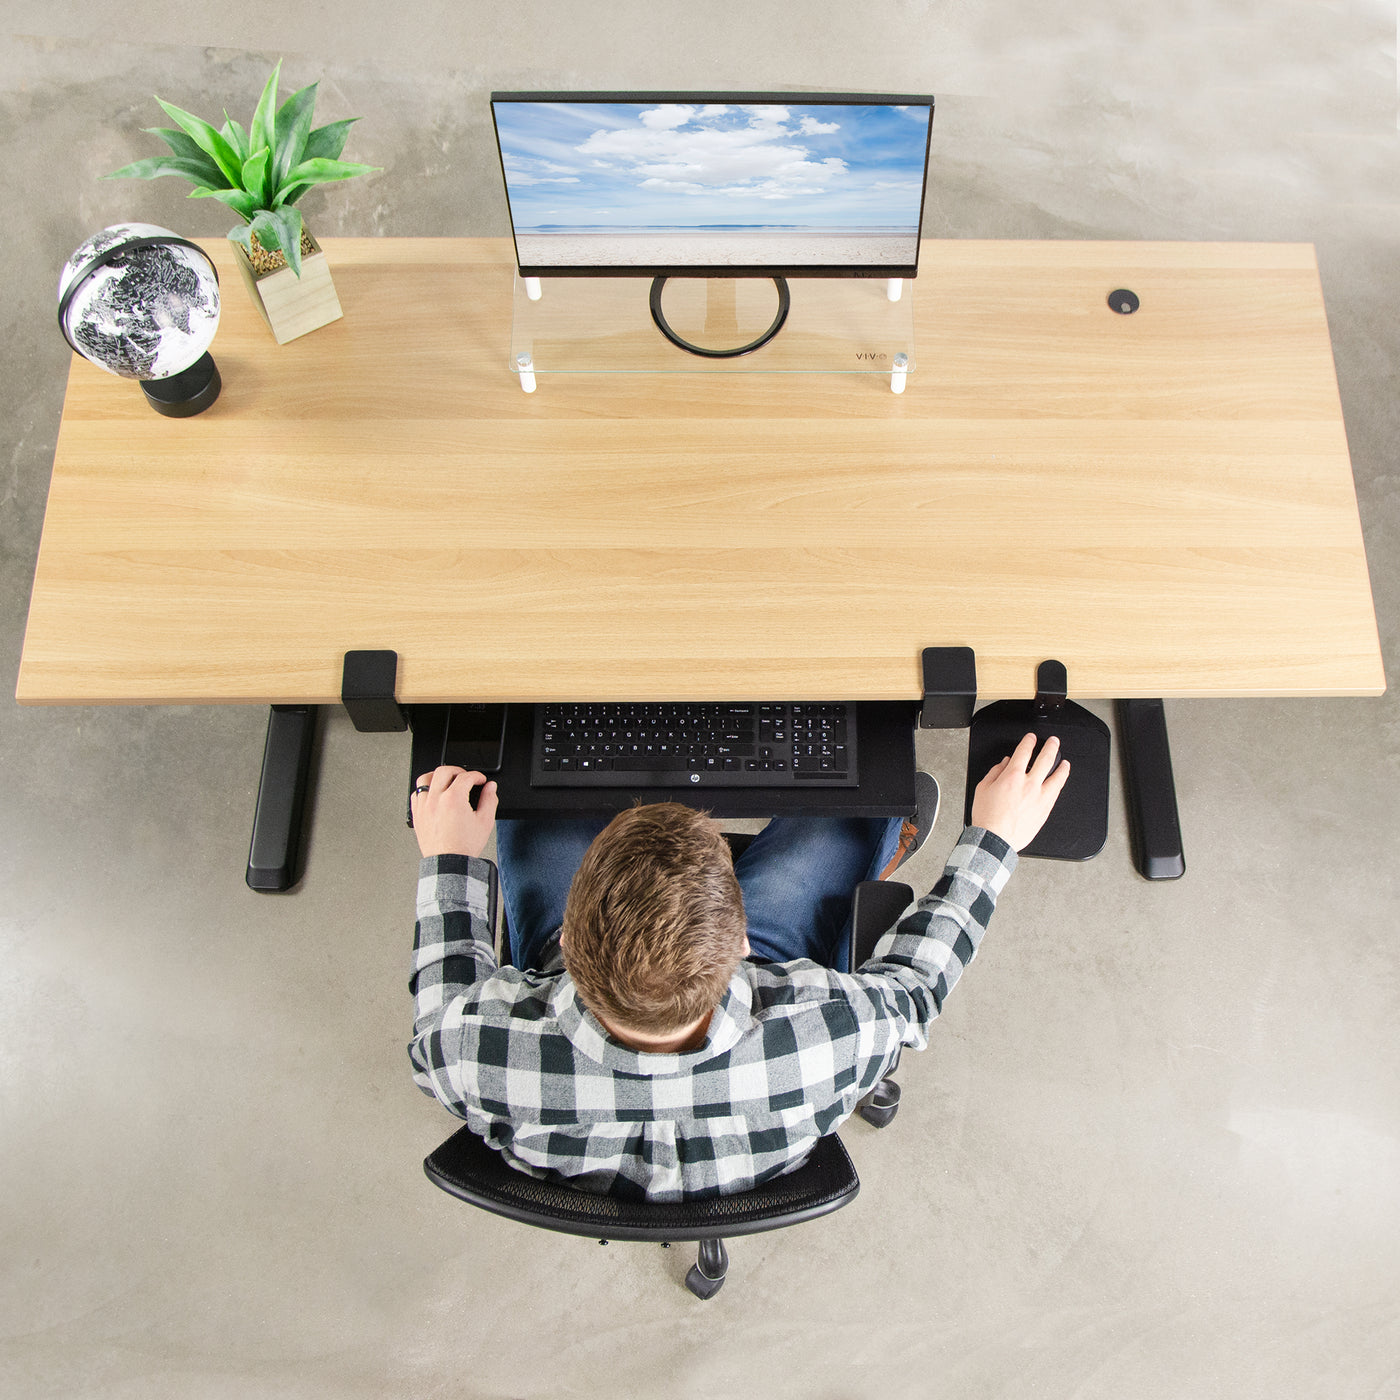 Clean, modern, and spacious desktop with under-desk keyboard and mouse pad trays. 